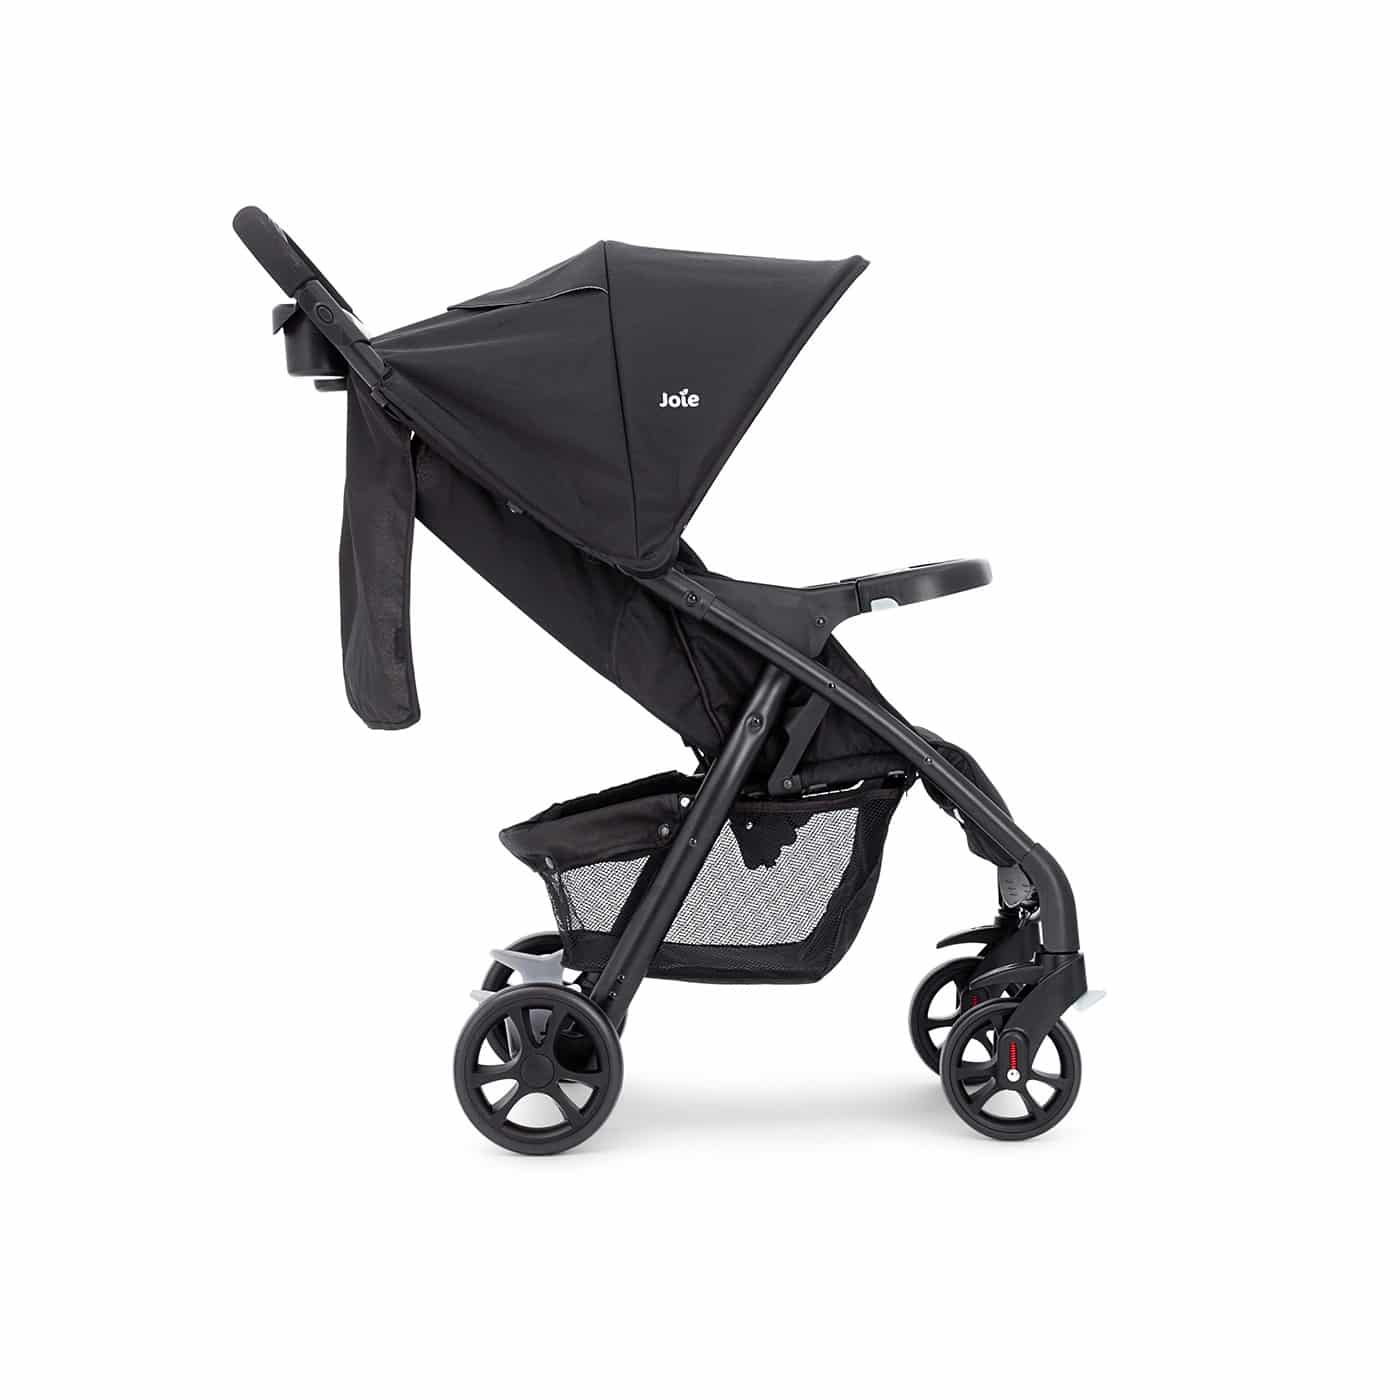 Joie Muze Travel System in Coal